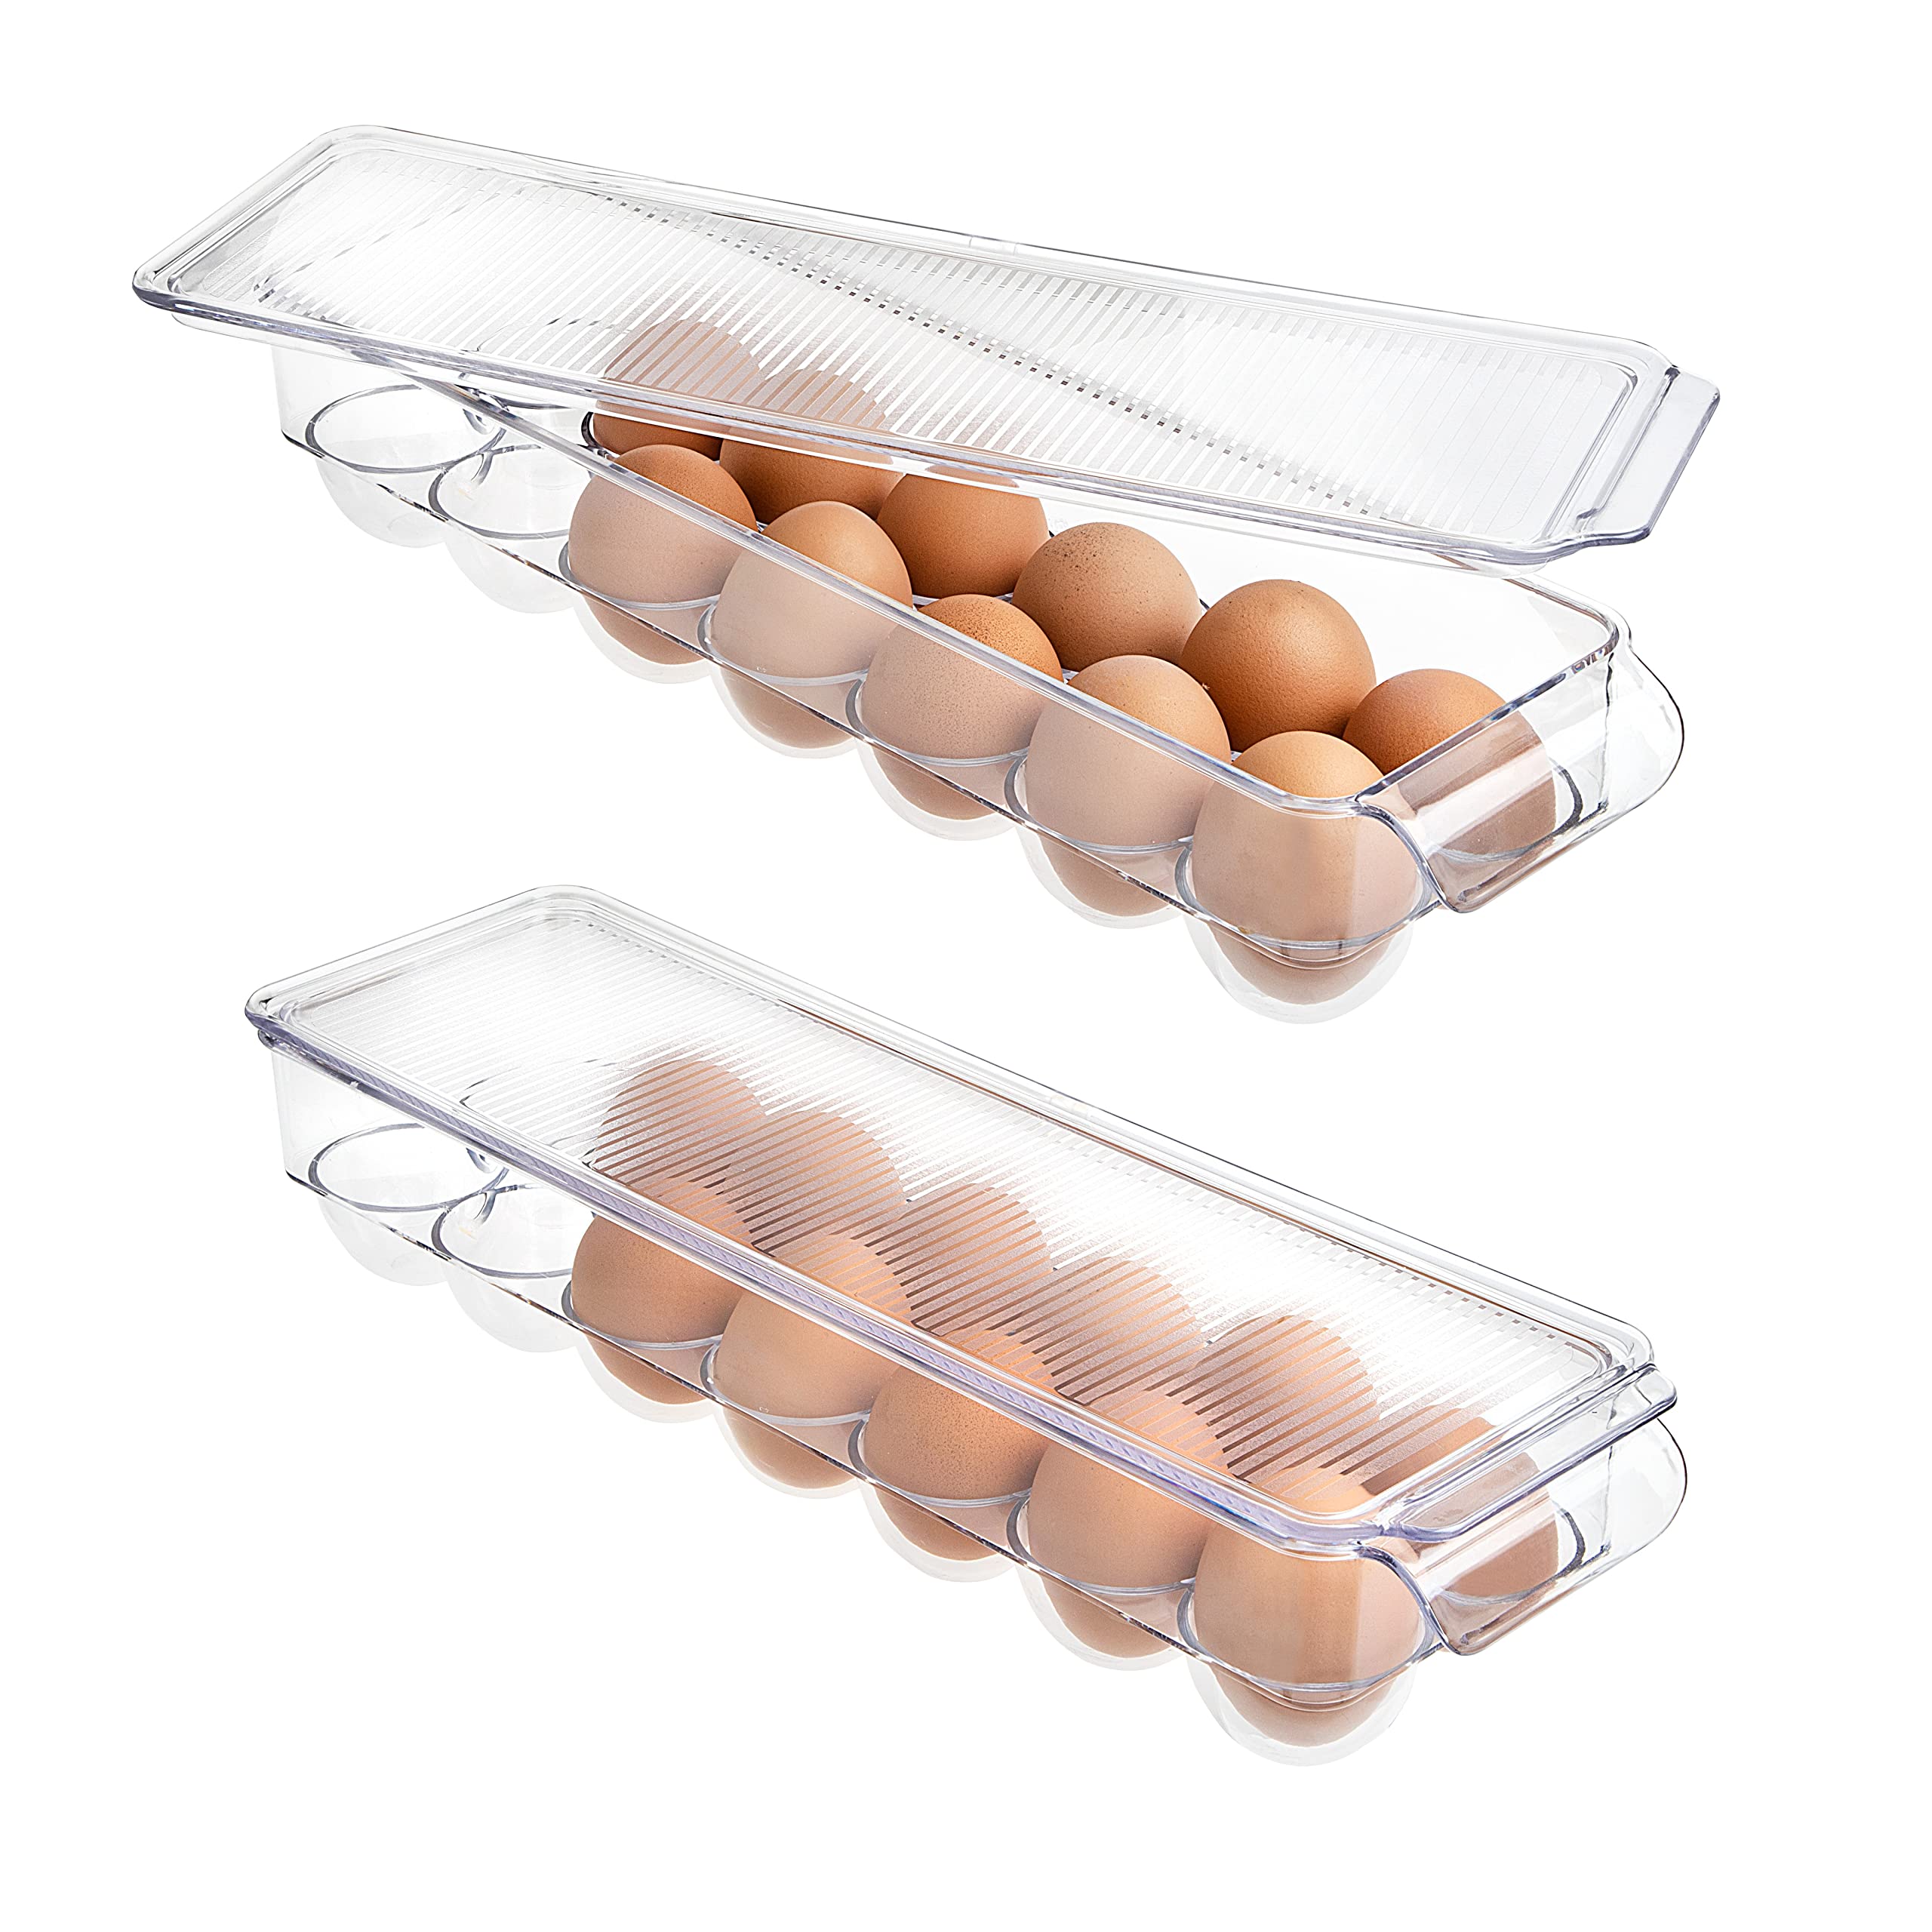 Clear Plastic Egg Holder - 2 Pack 14 Egg Tray Holder (Holds 28 Eggs Total) - Size 4" x 15" BPA Free Fridge Organizer with Lid, Refrigerator Storage Container - by SIMPLEMADE  - Like New